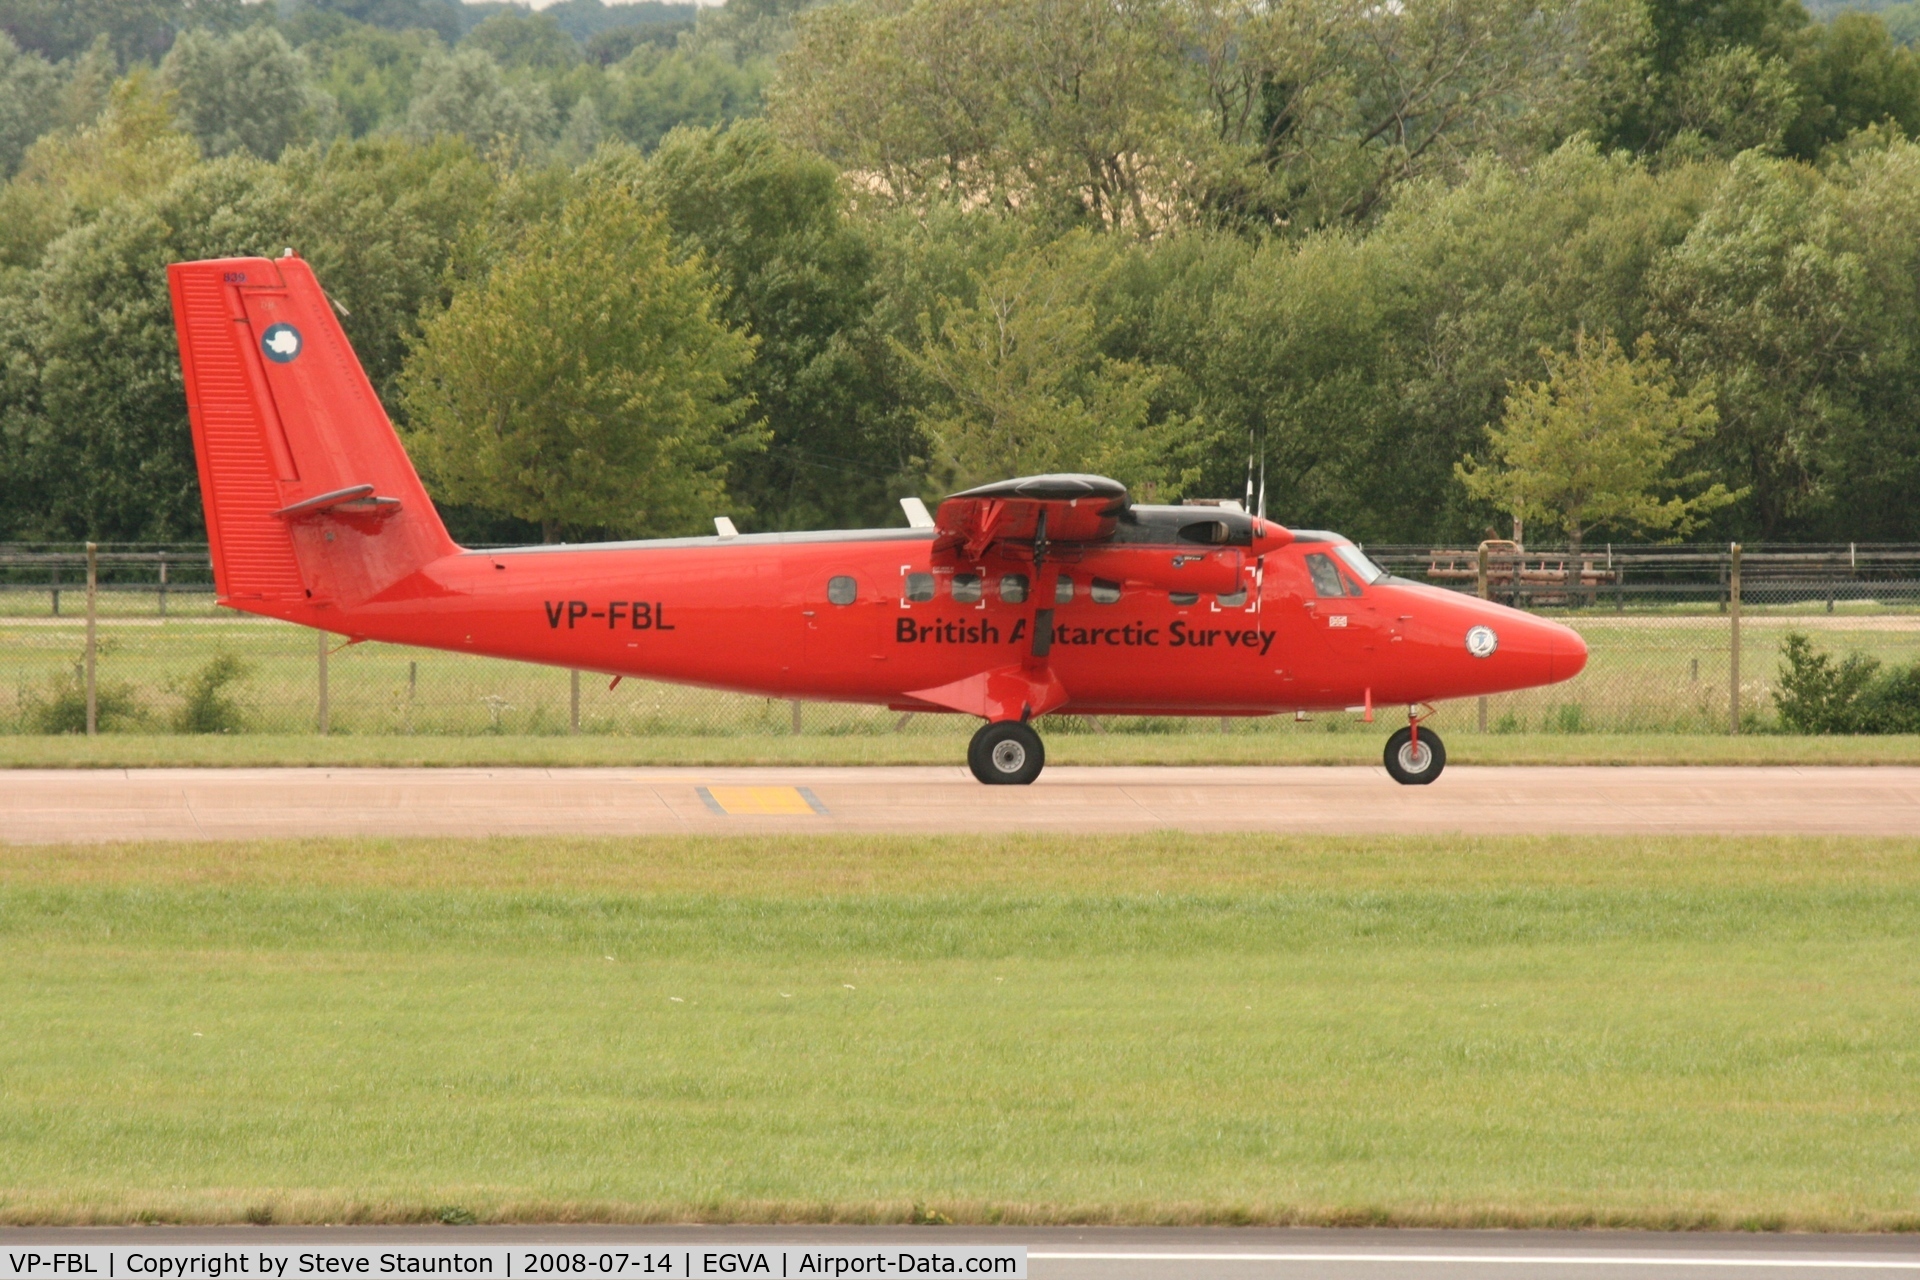 VP-FBL, 1988 De Havilland Canada DHC-6-300 Twin Otter C/N 839, Taken at the Royal International Air Tattoo 2008 during arrivals and departures (show days cancelled due to bad weather)